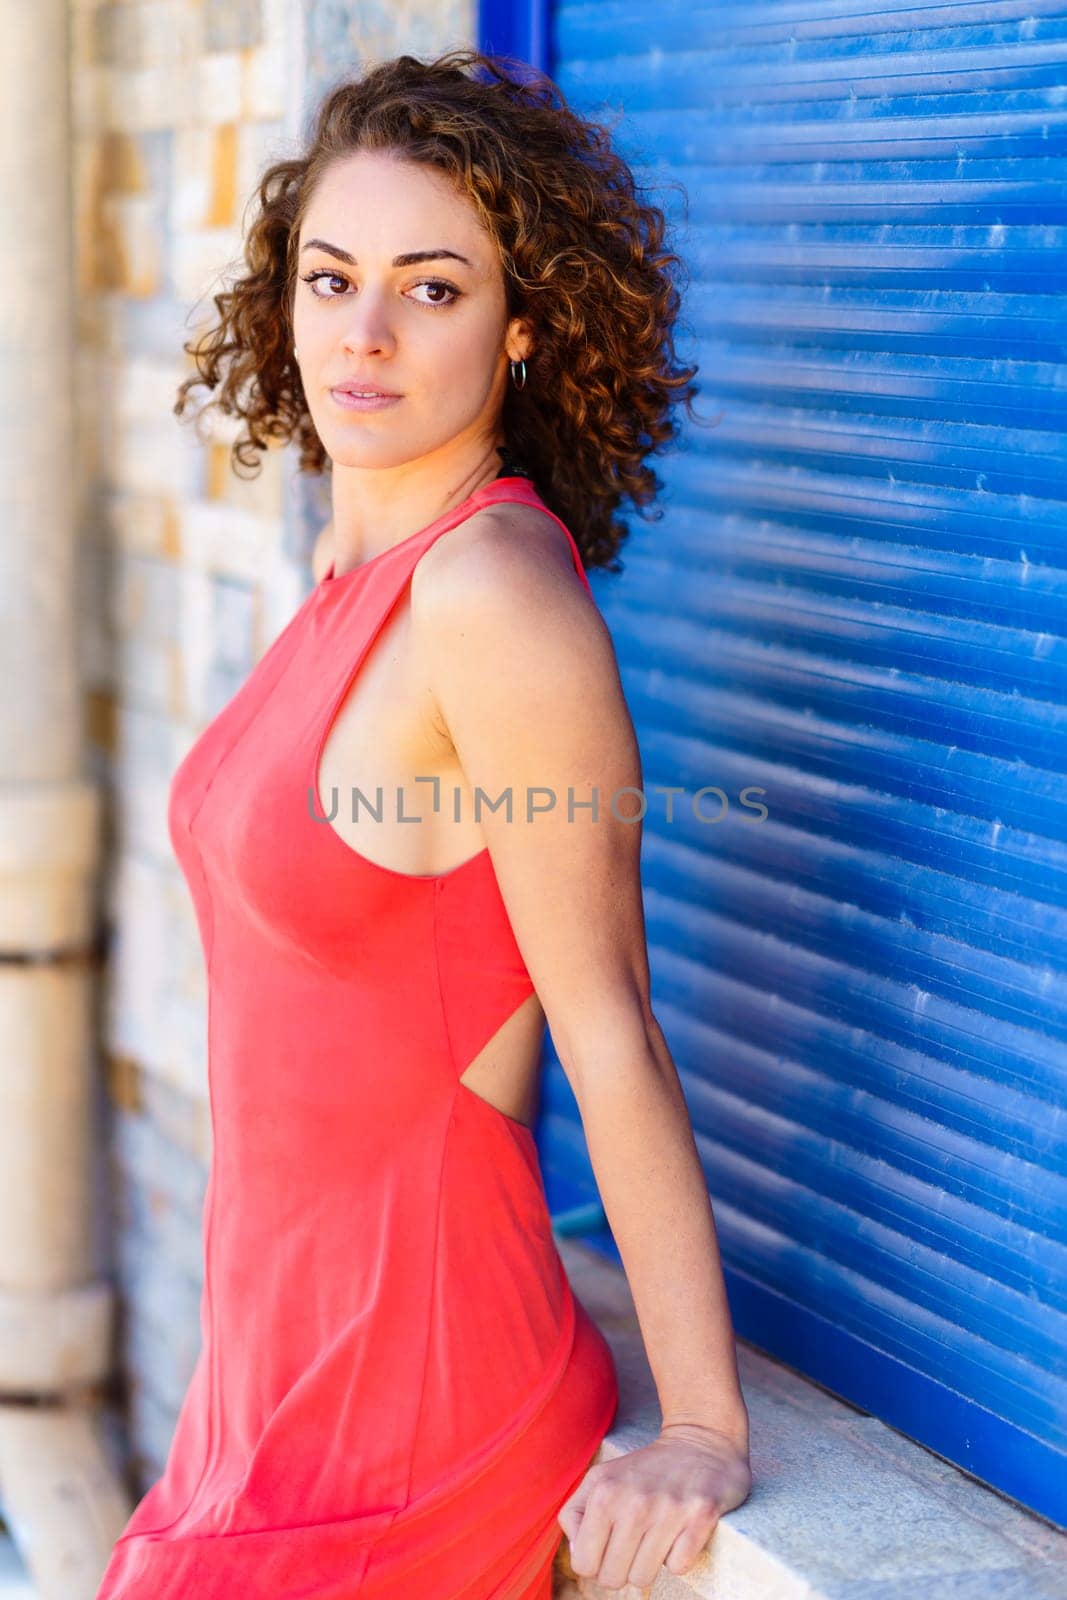 Attractive woman in red dress looking at camera by javiindy